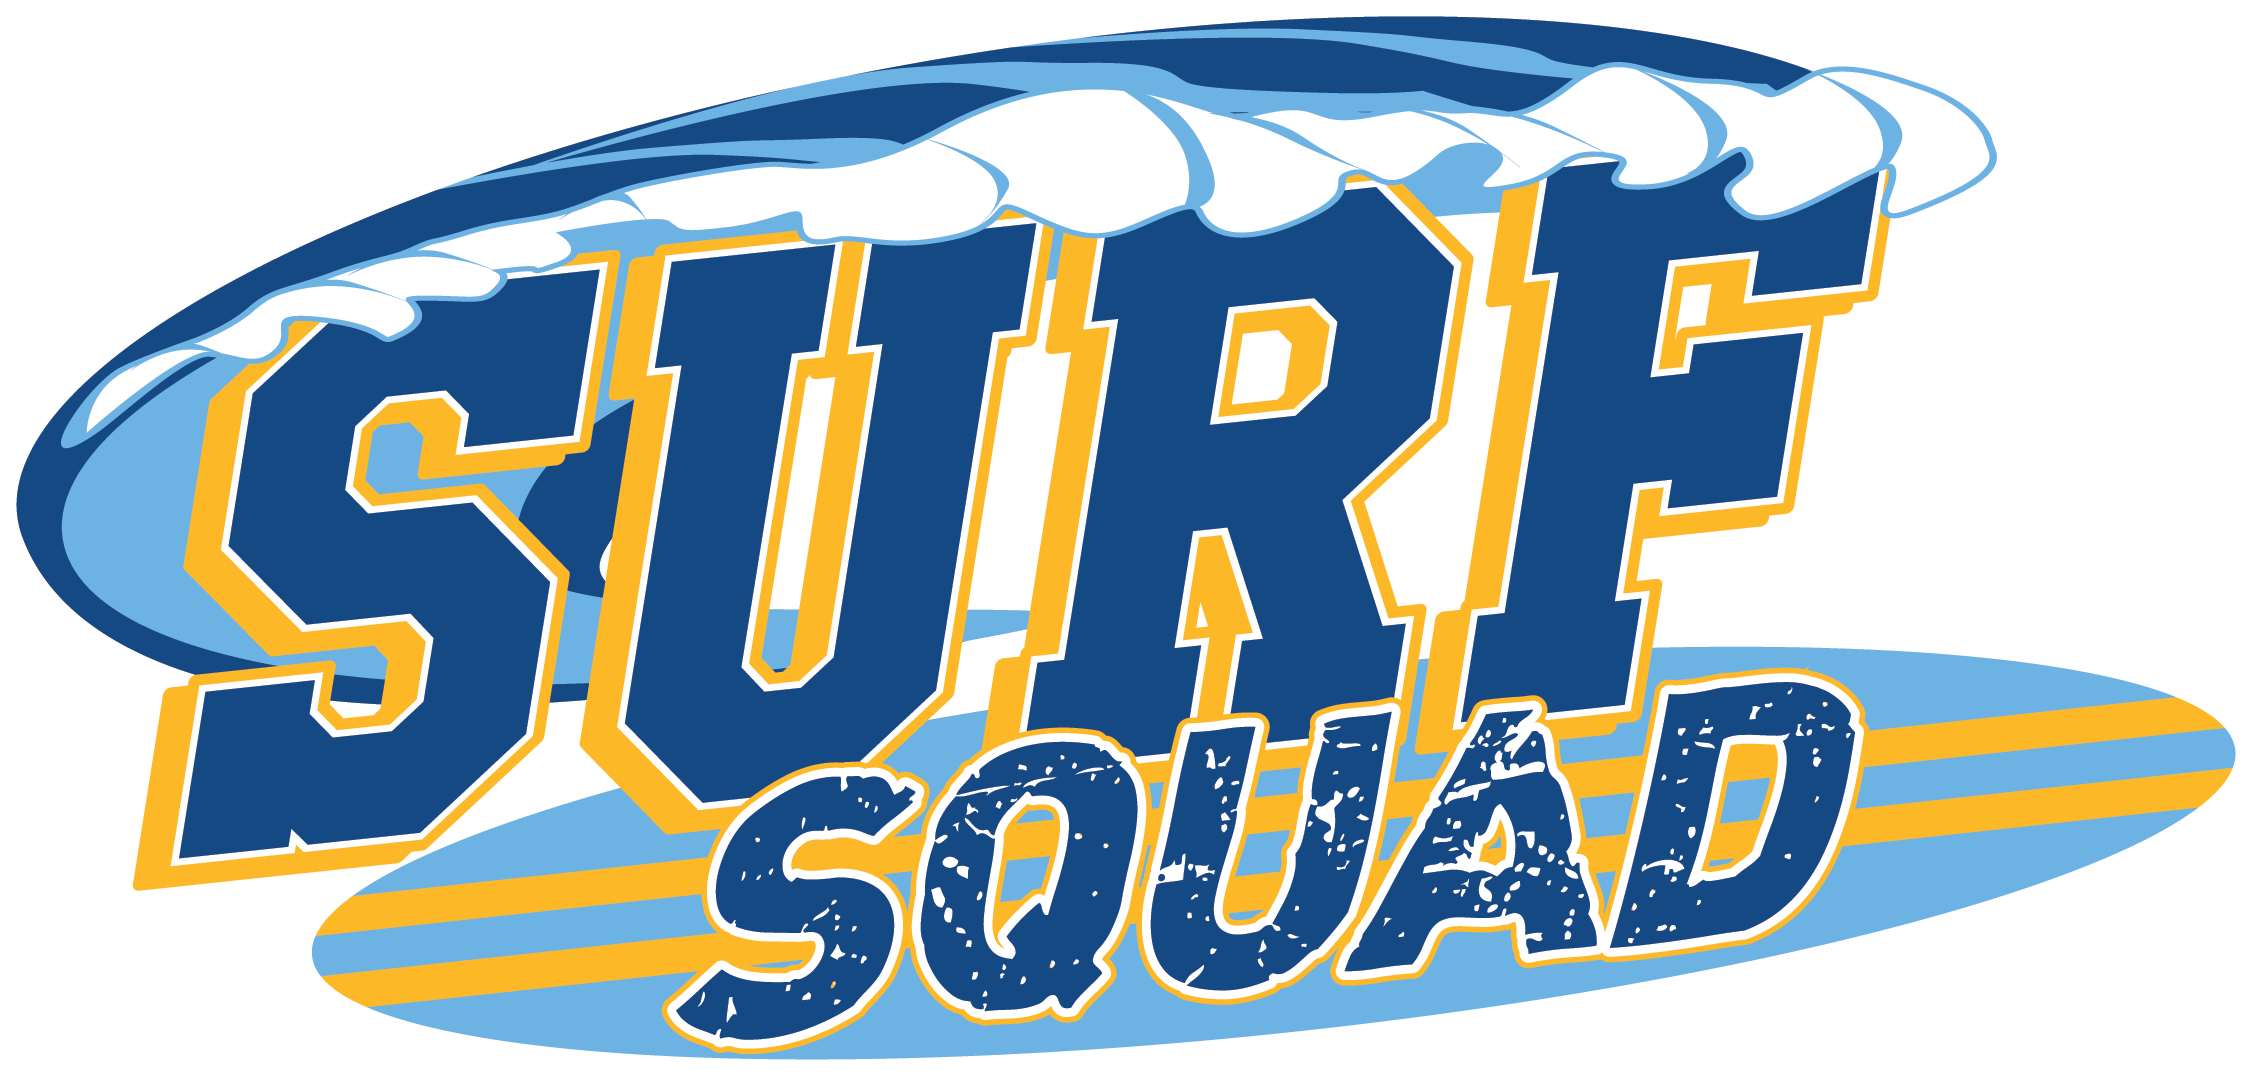 Squad Is The First Co-ed Intergenerational Dance And - Squad Is The First Co-ed Intergenerational Dance And (2252x1076)